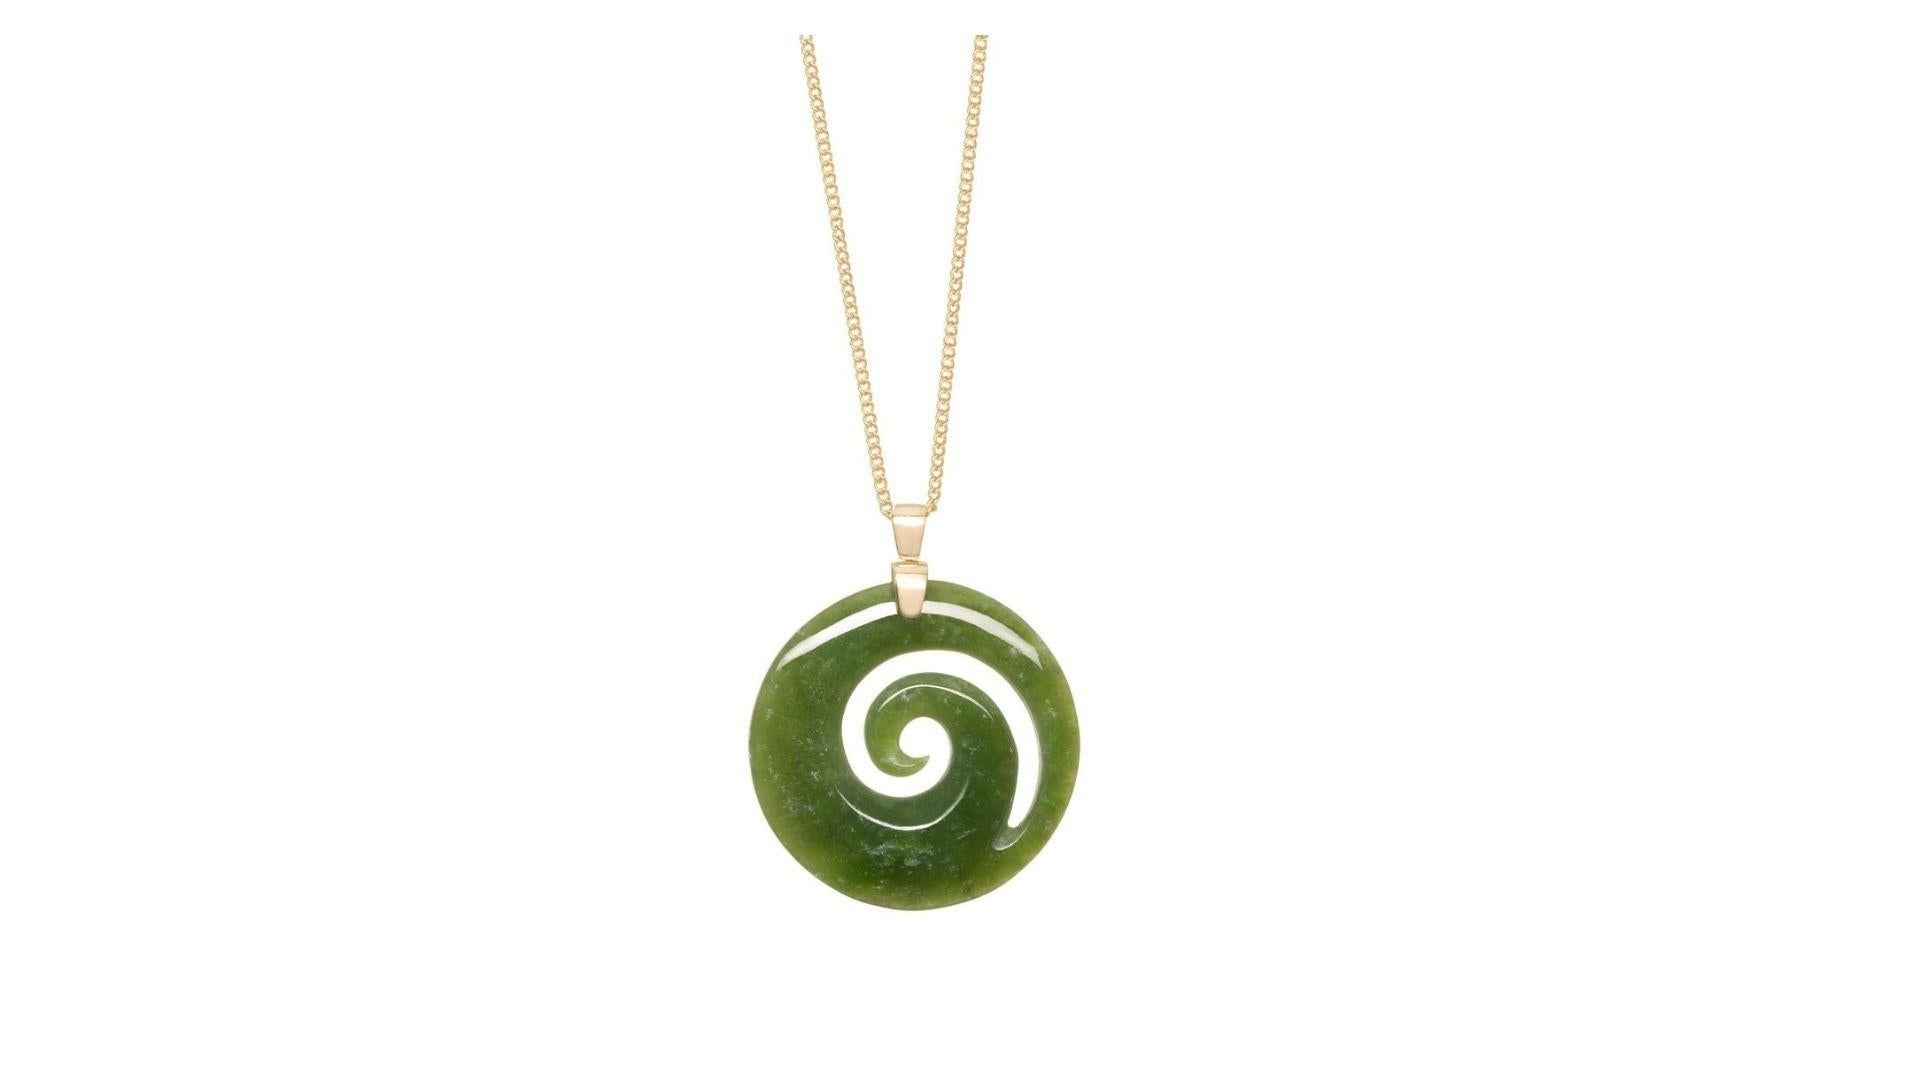 New Zealand Greenstone 18CT Gold Spiral Necklace

Taking the traditional and setting it on a modern gold chain brings new life into the design and makes this a more contemporary piece of pounamu jewellery.